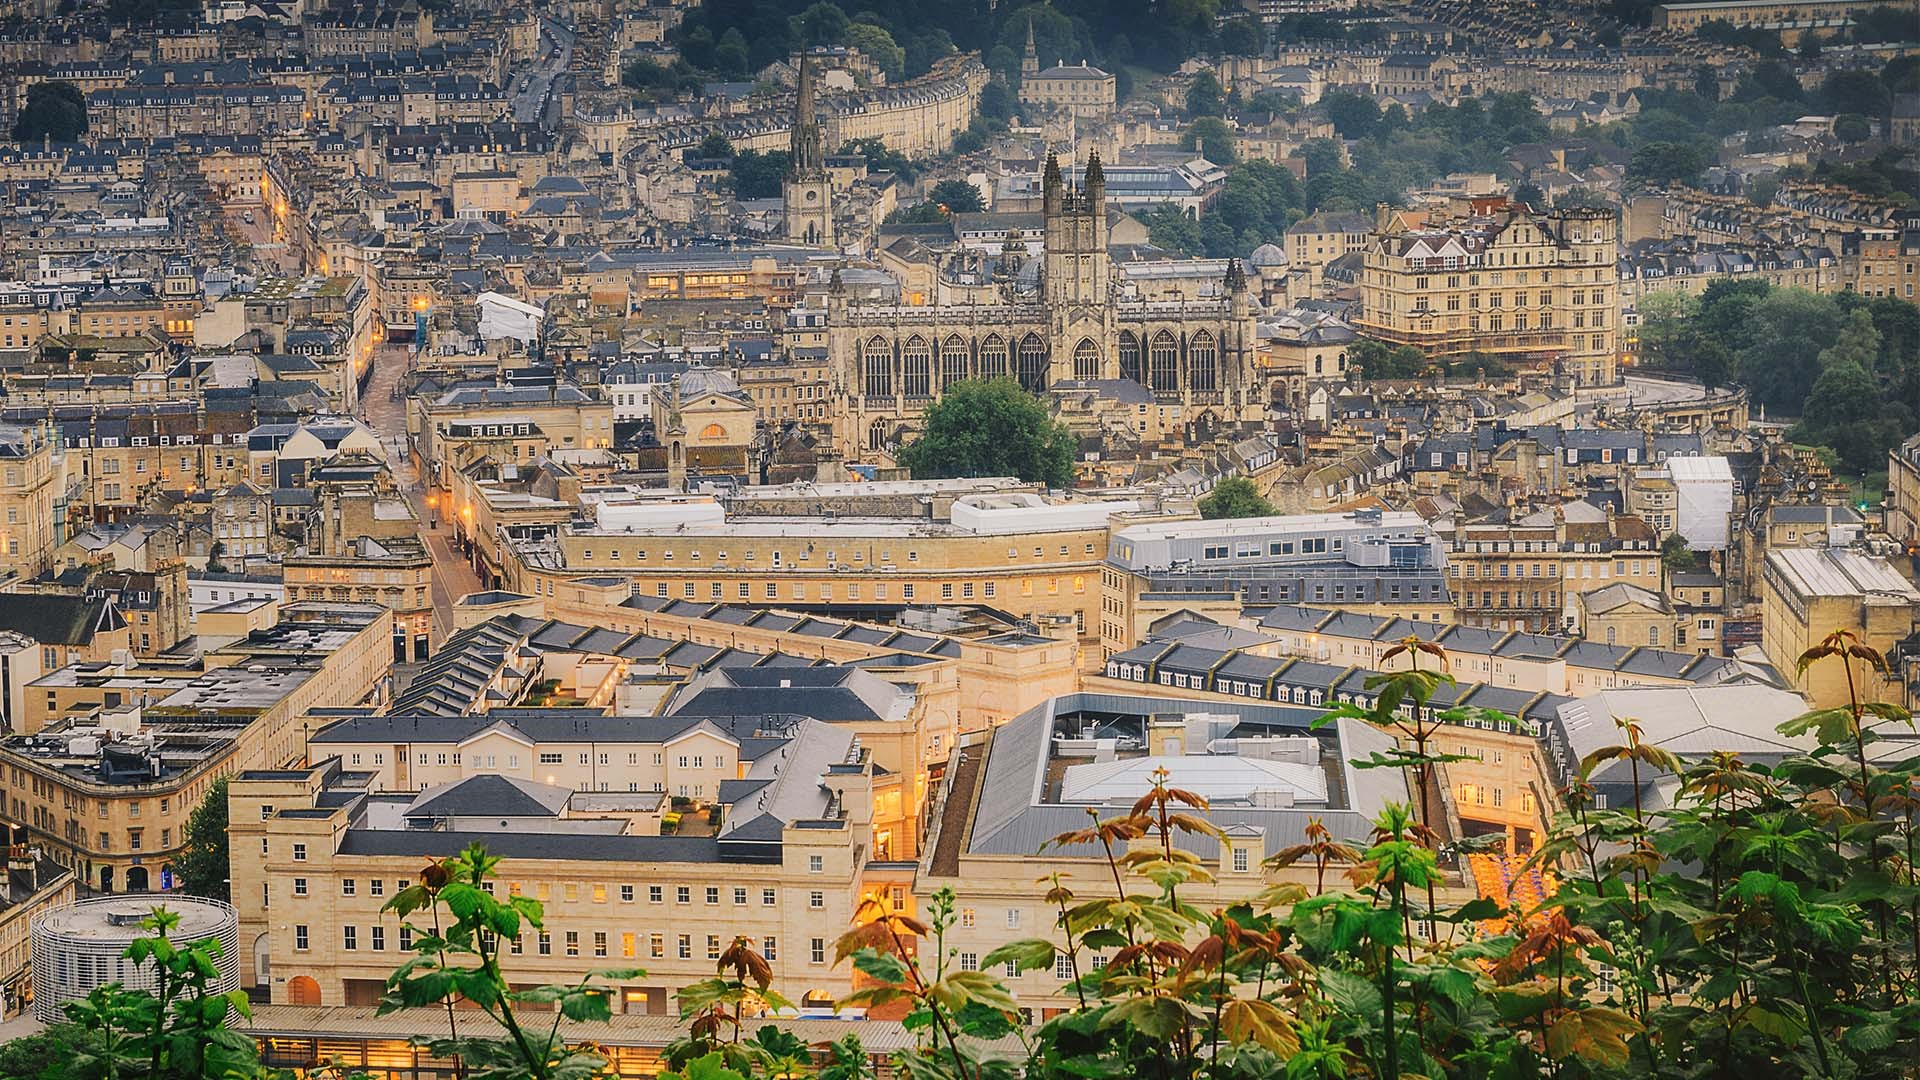 View over Bath from Alexandra Park